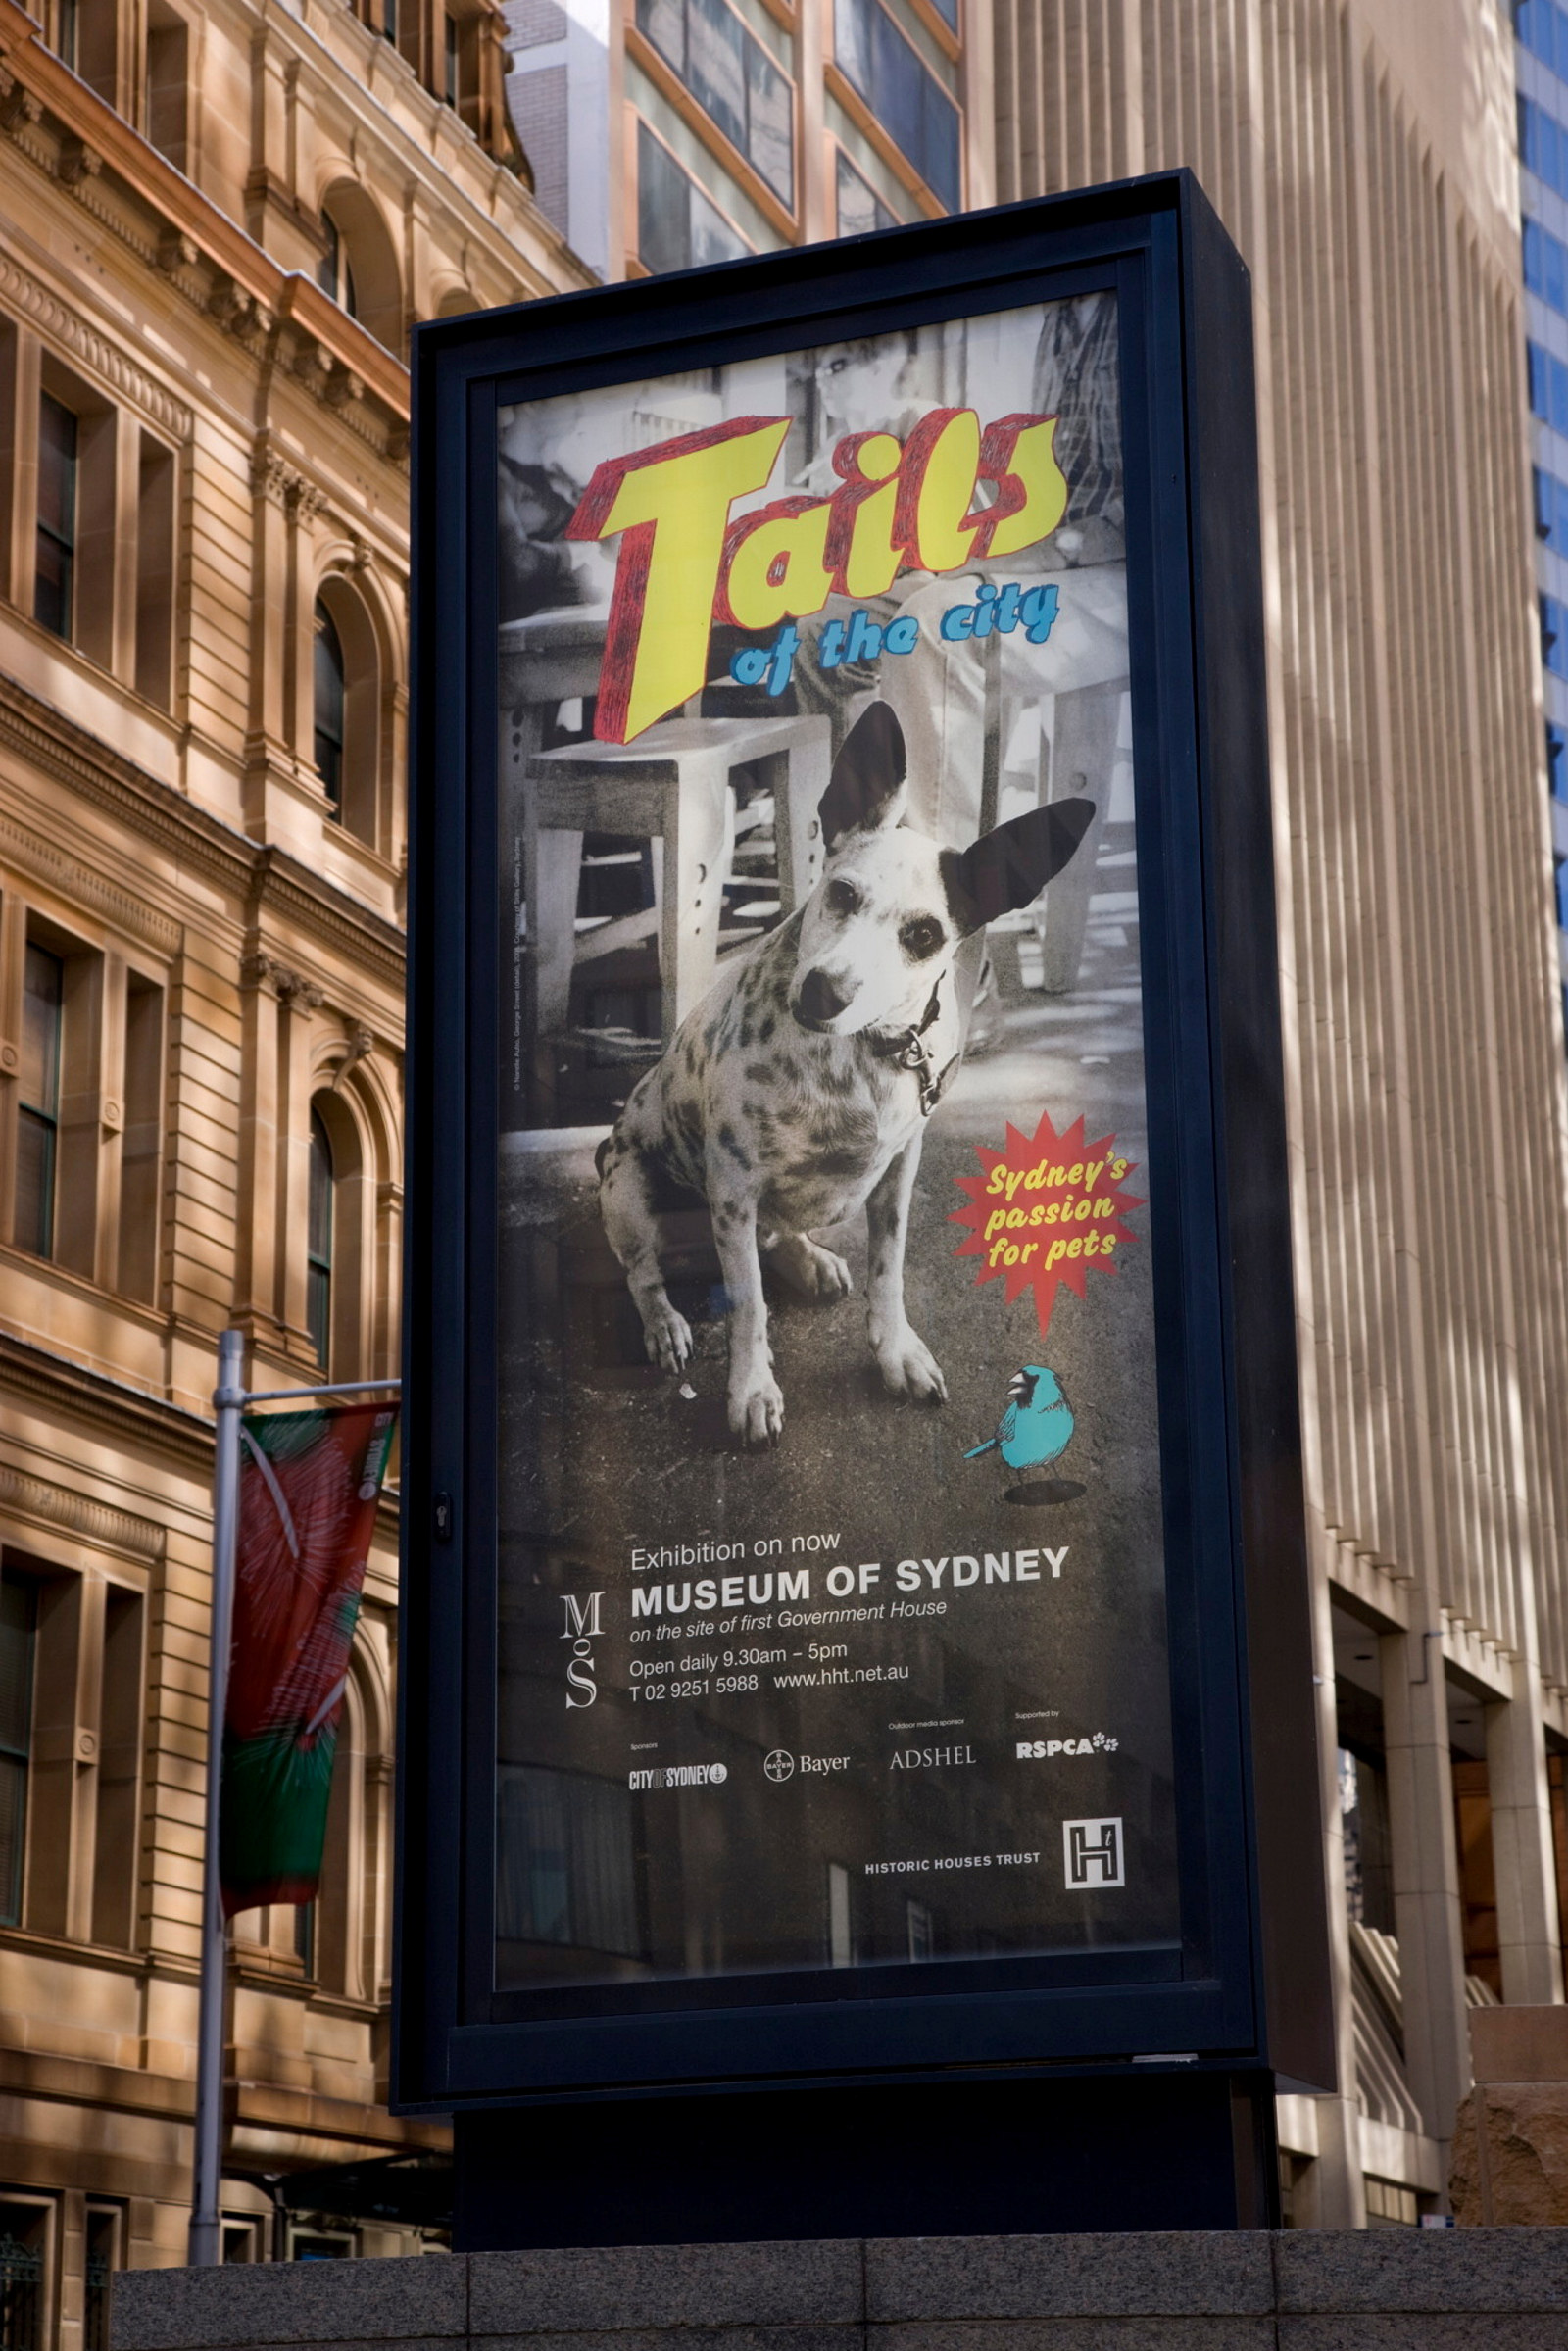 Tails of the city: Sydney's passion for pets installation view